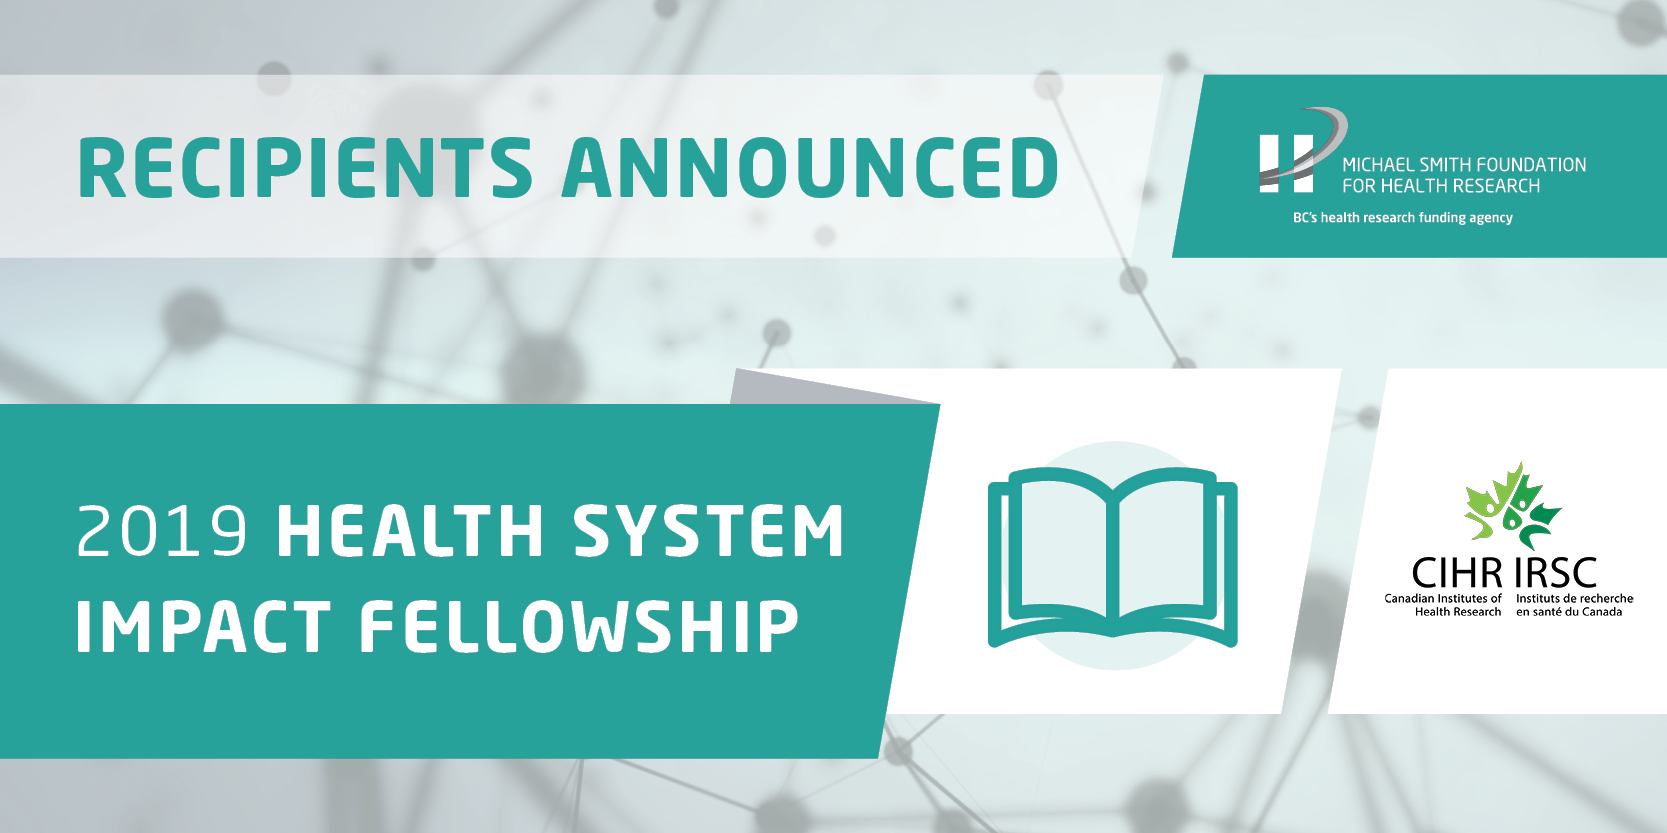 New BC research Fellows tackle pressing health system challenges